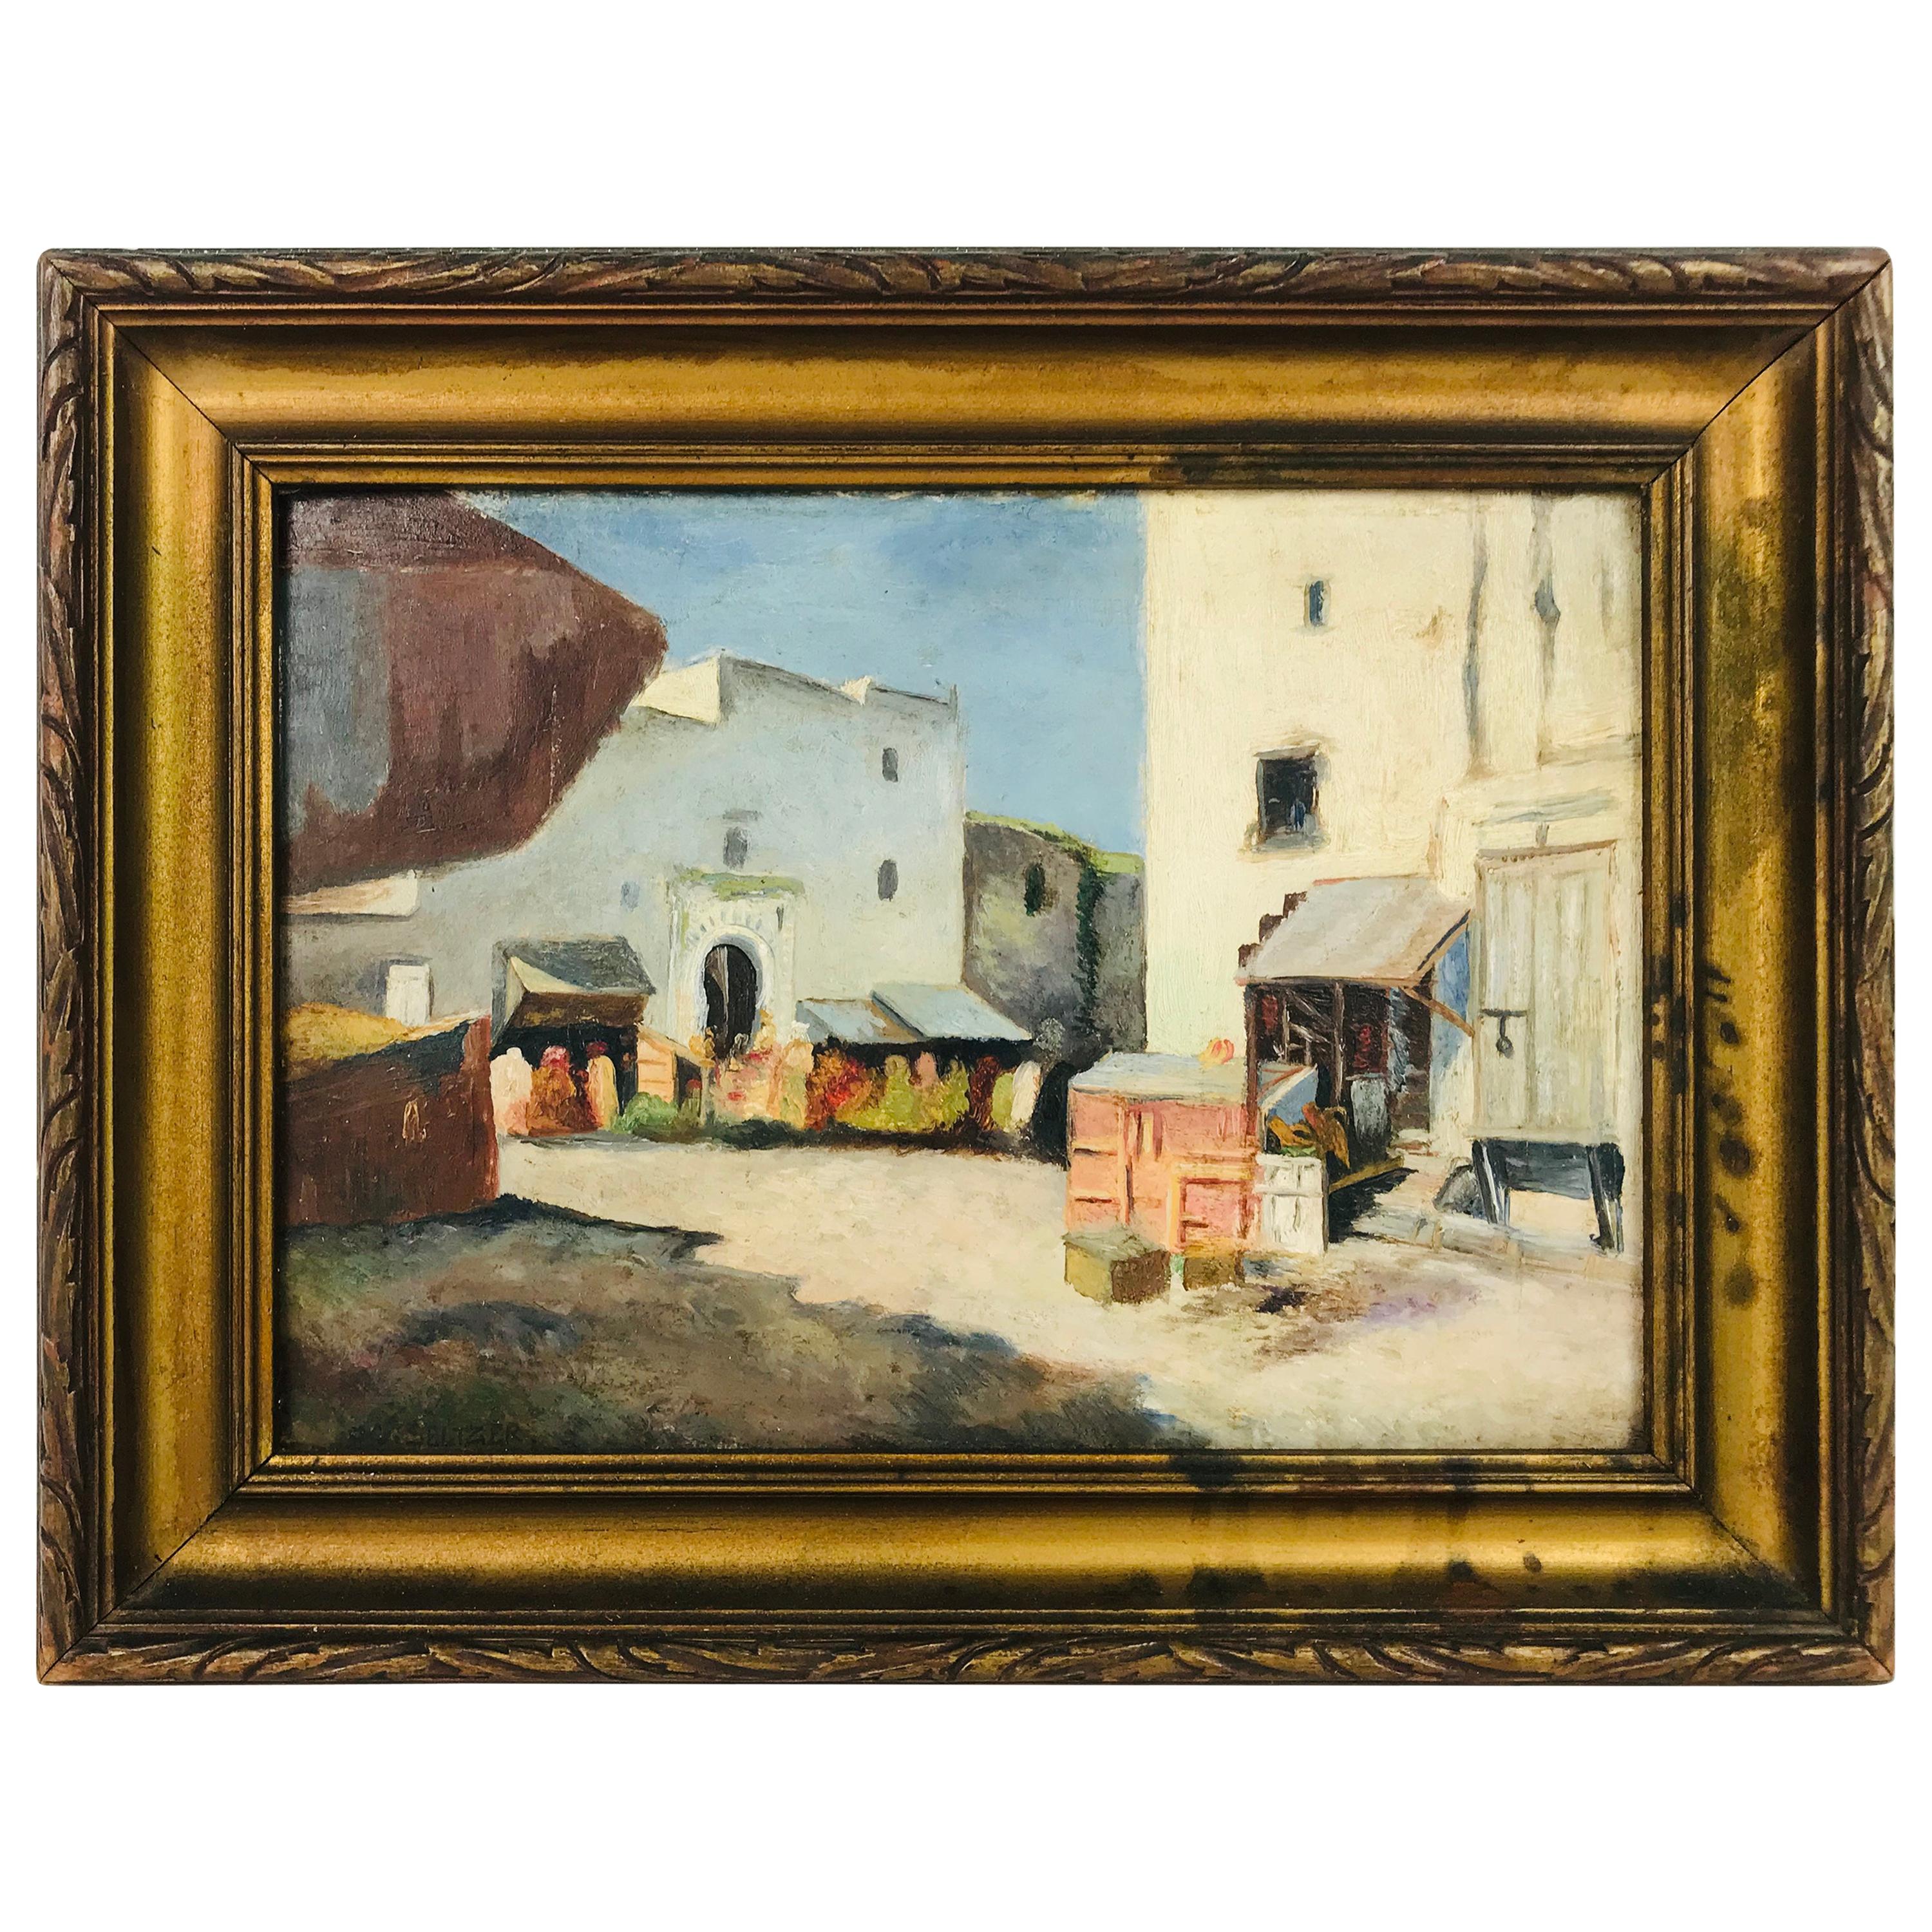 "Pueblo Town" Oil on Board by American Listed Artist Olaf Carl Seltzer